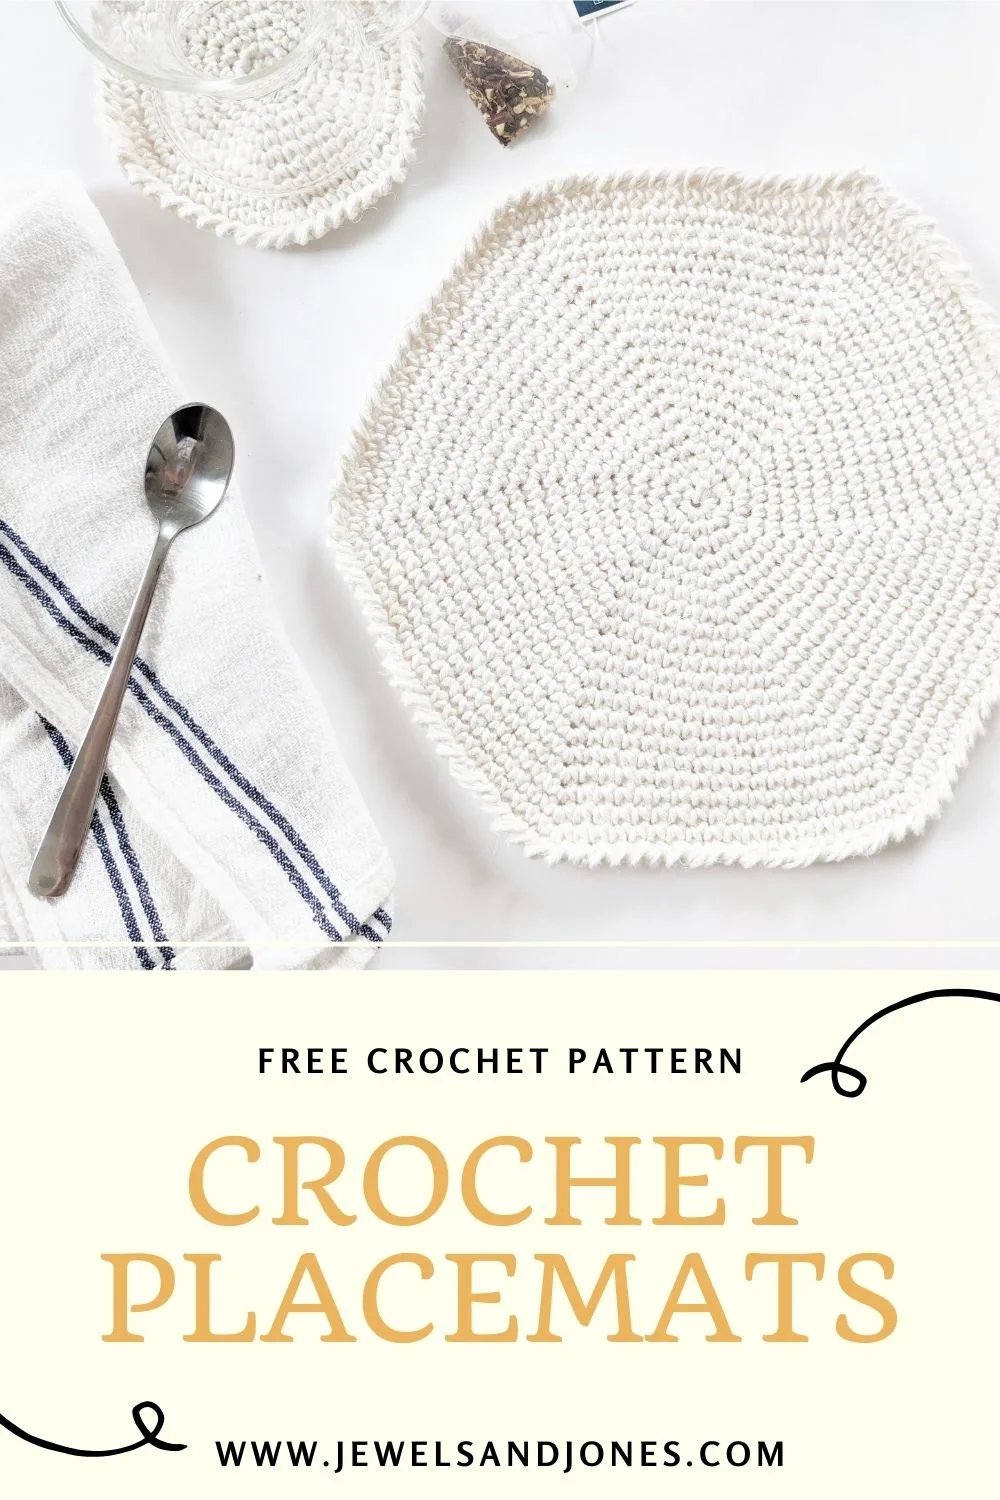 a pinnable image of the free crochet placemat pattern